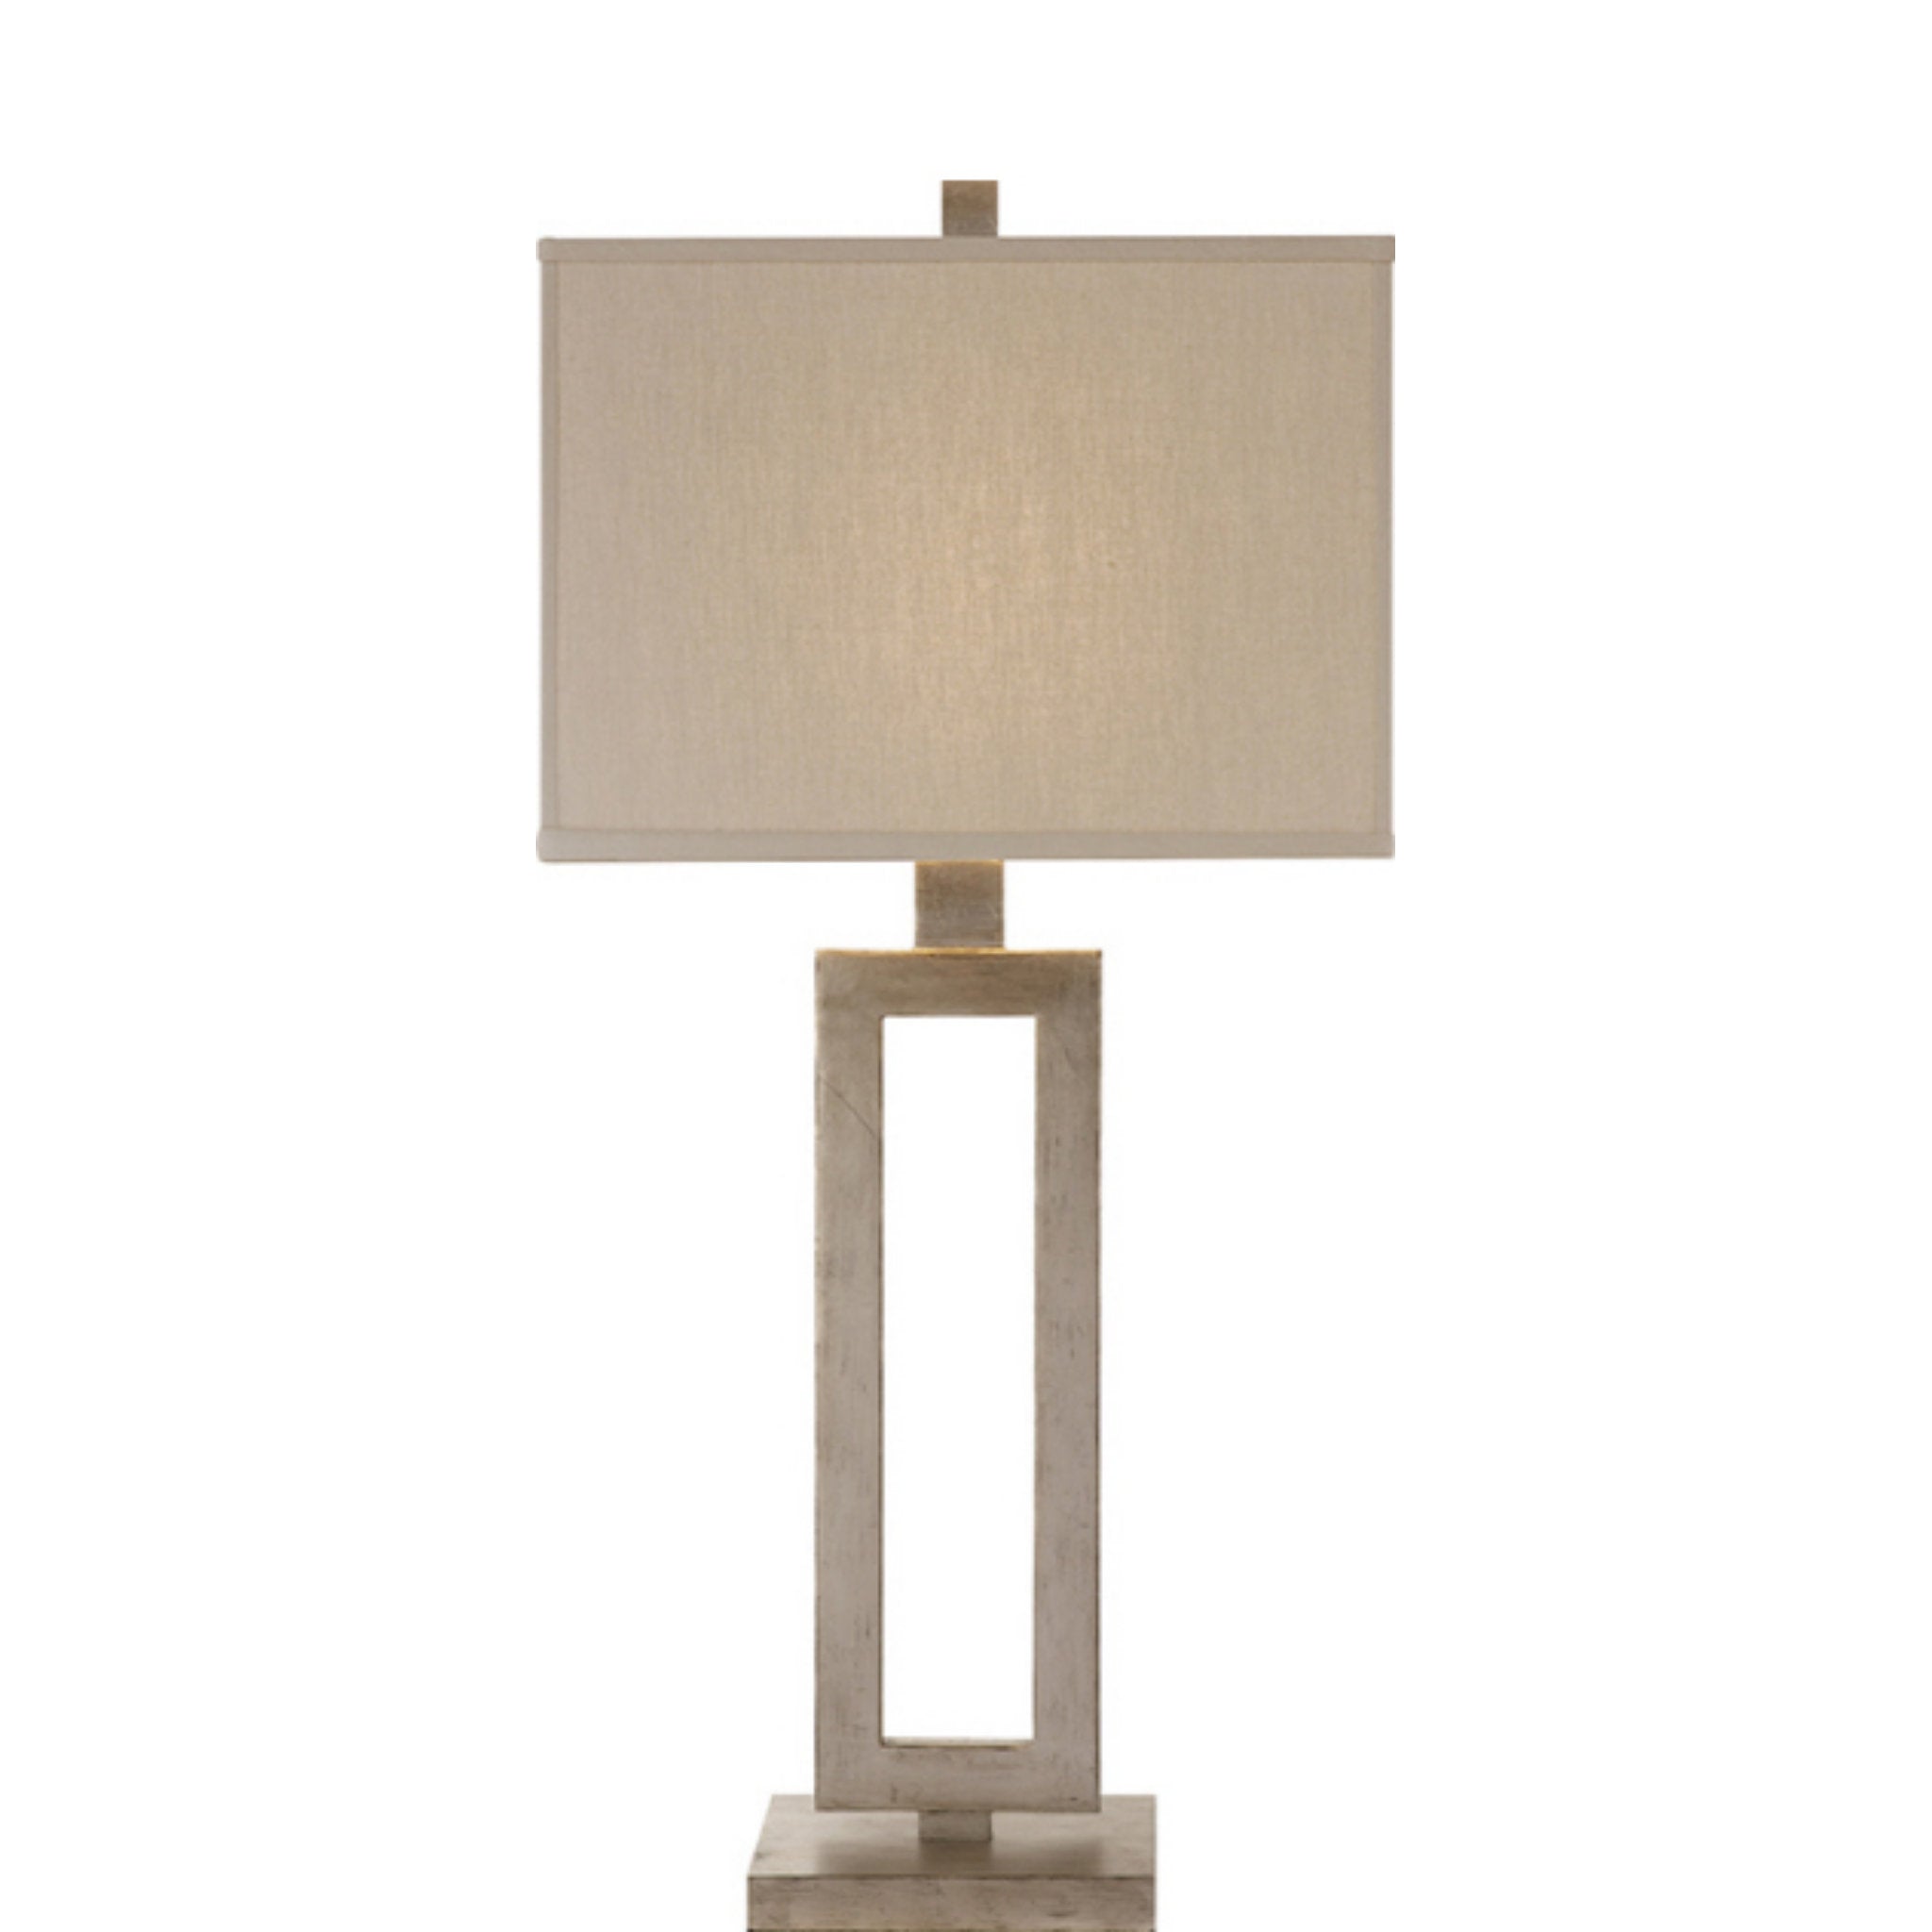 Suzanne Kasler Mod Tall Table Lamp in Burnished Silver Leaf with Linen Shade